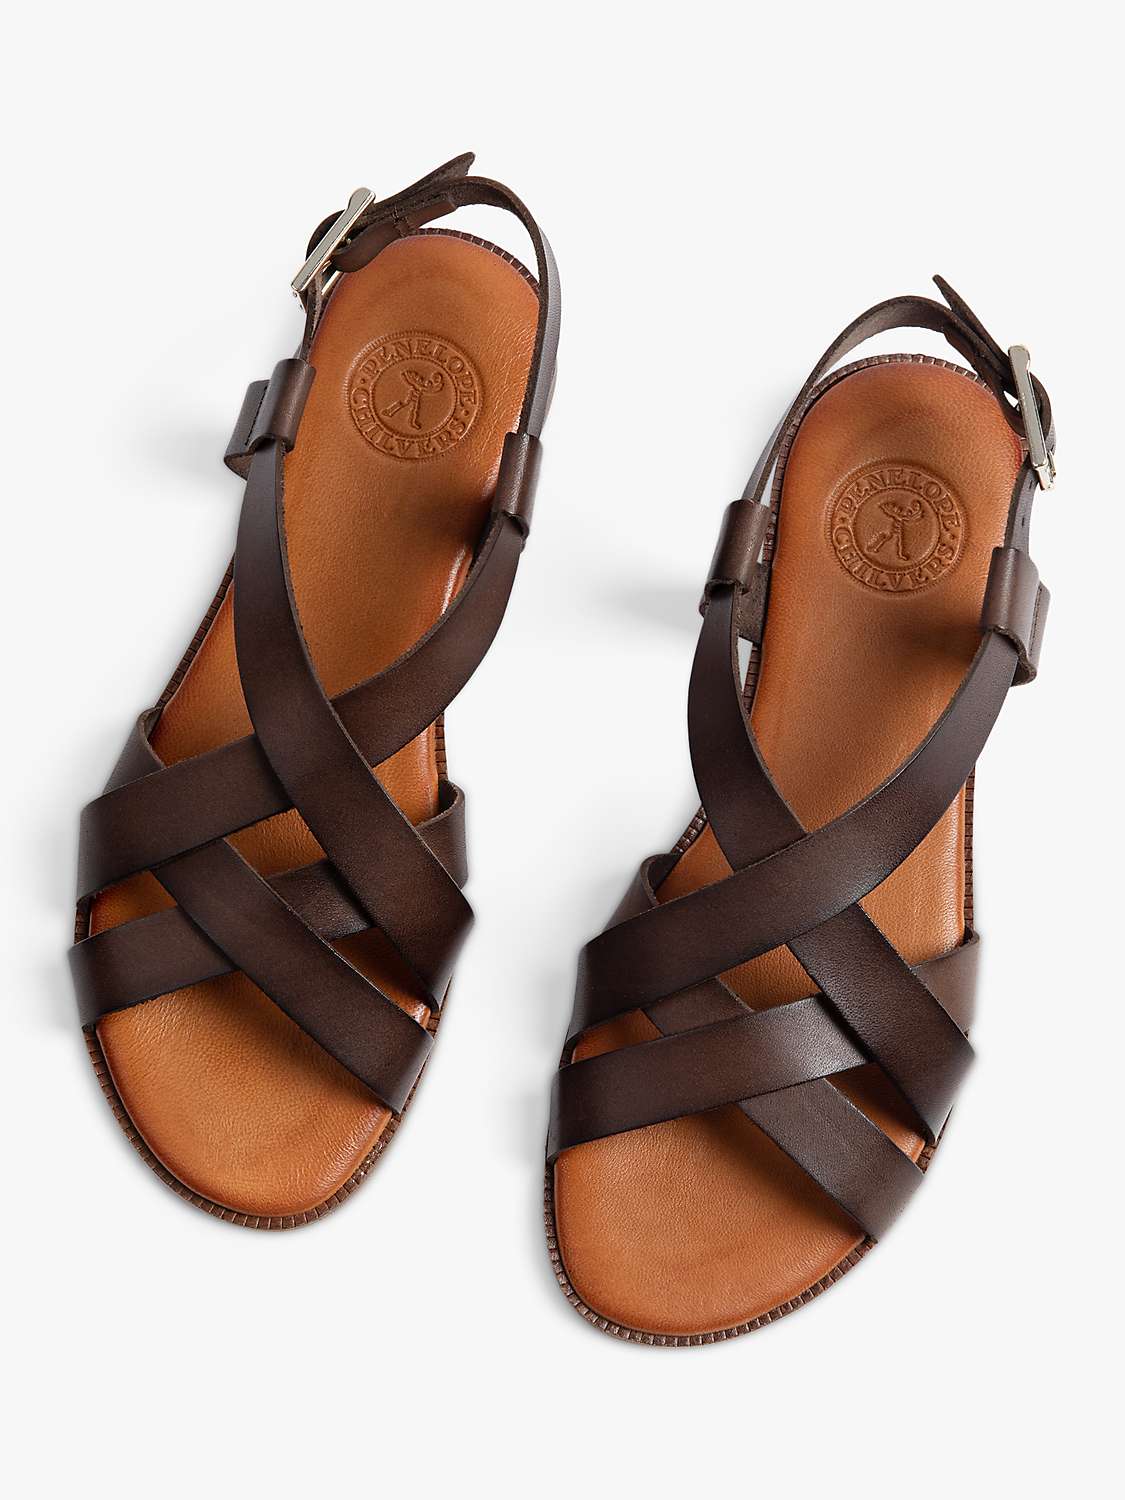 Buy Penelope Chilvers Buttercup Leather Sandals, Chocolate Online at johnlewis.com